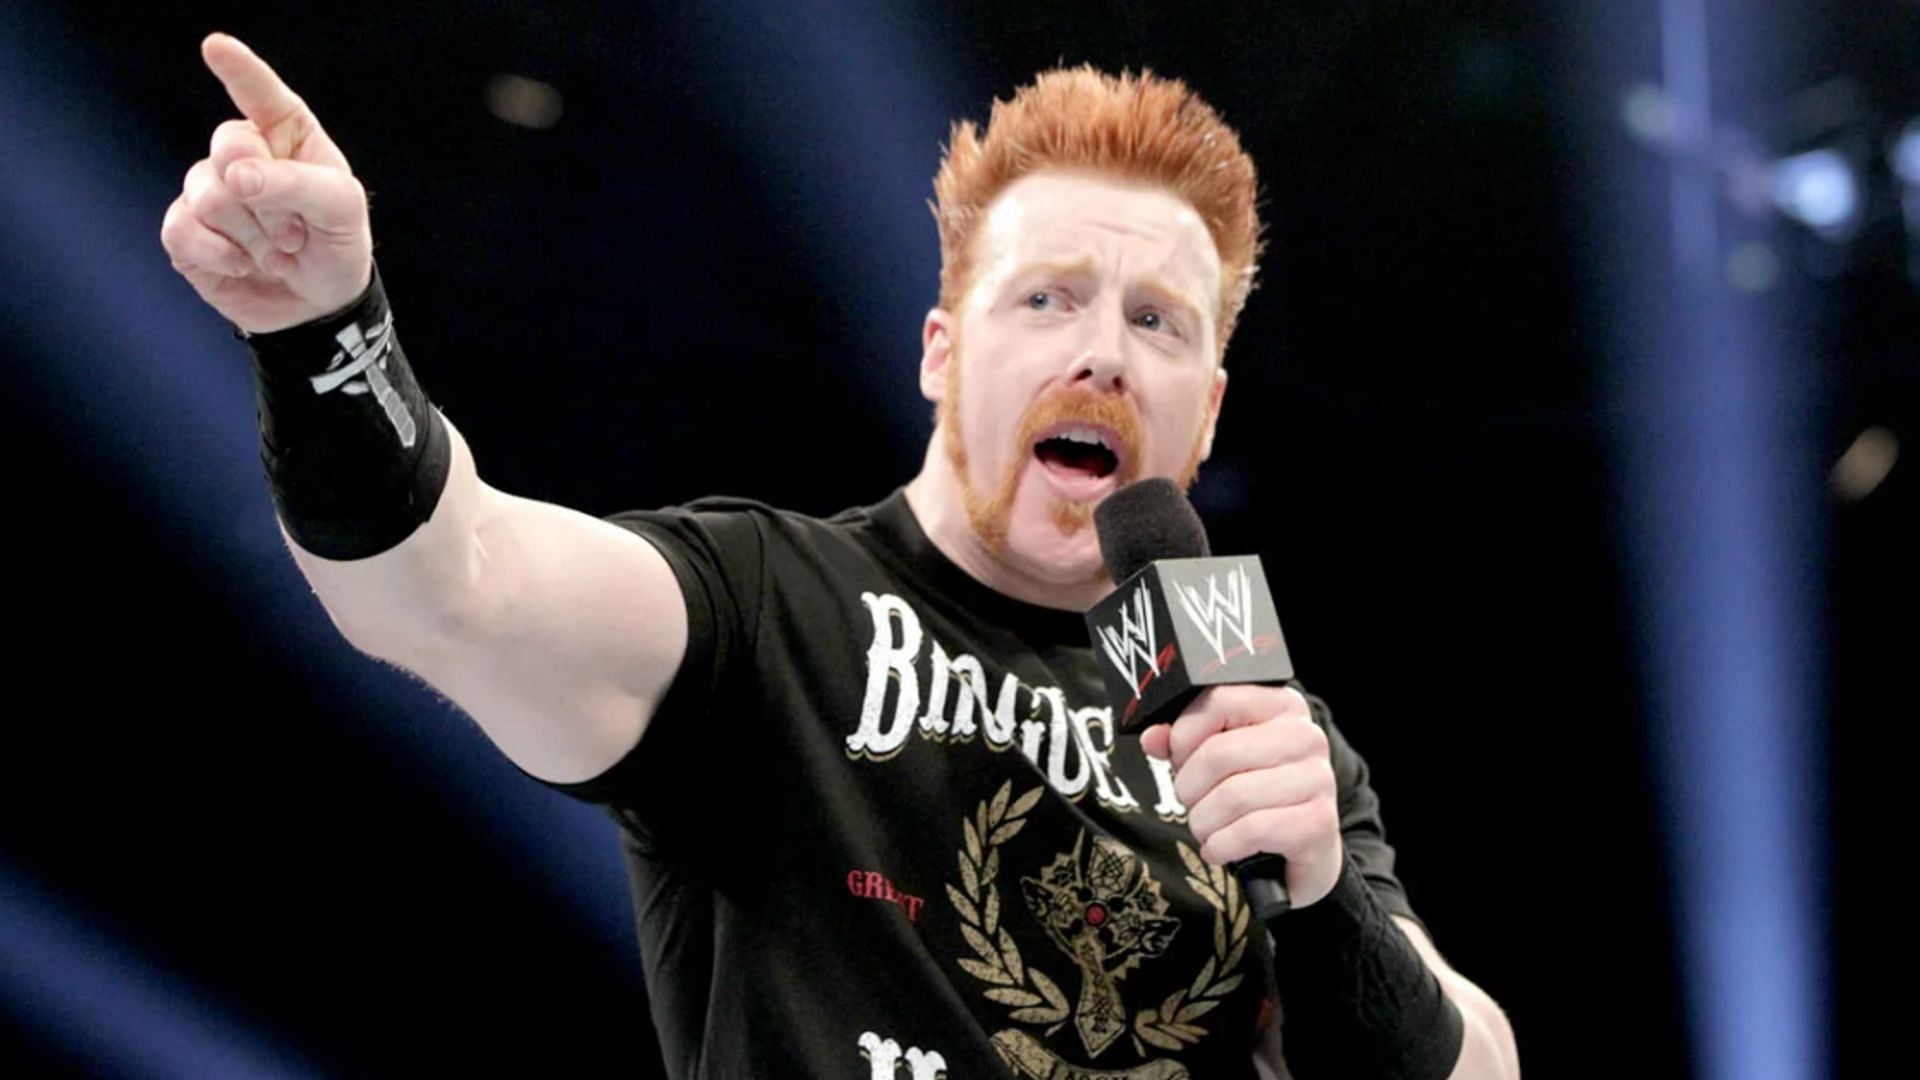 WWE SmackDown star Sheamus during a promo